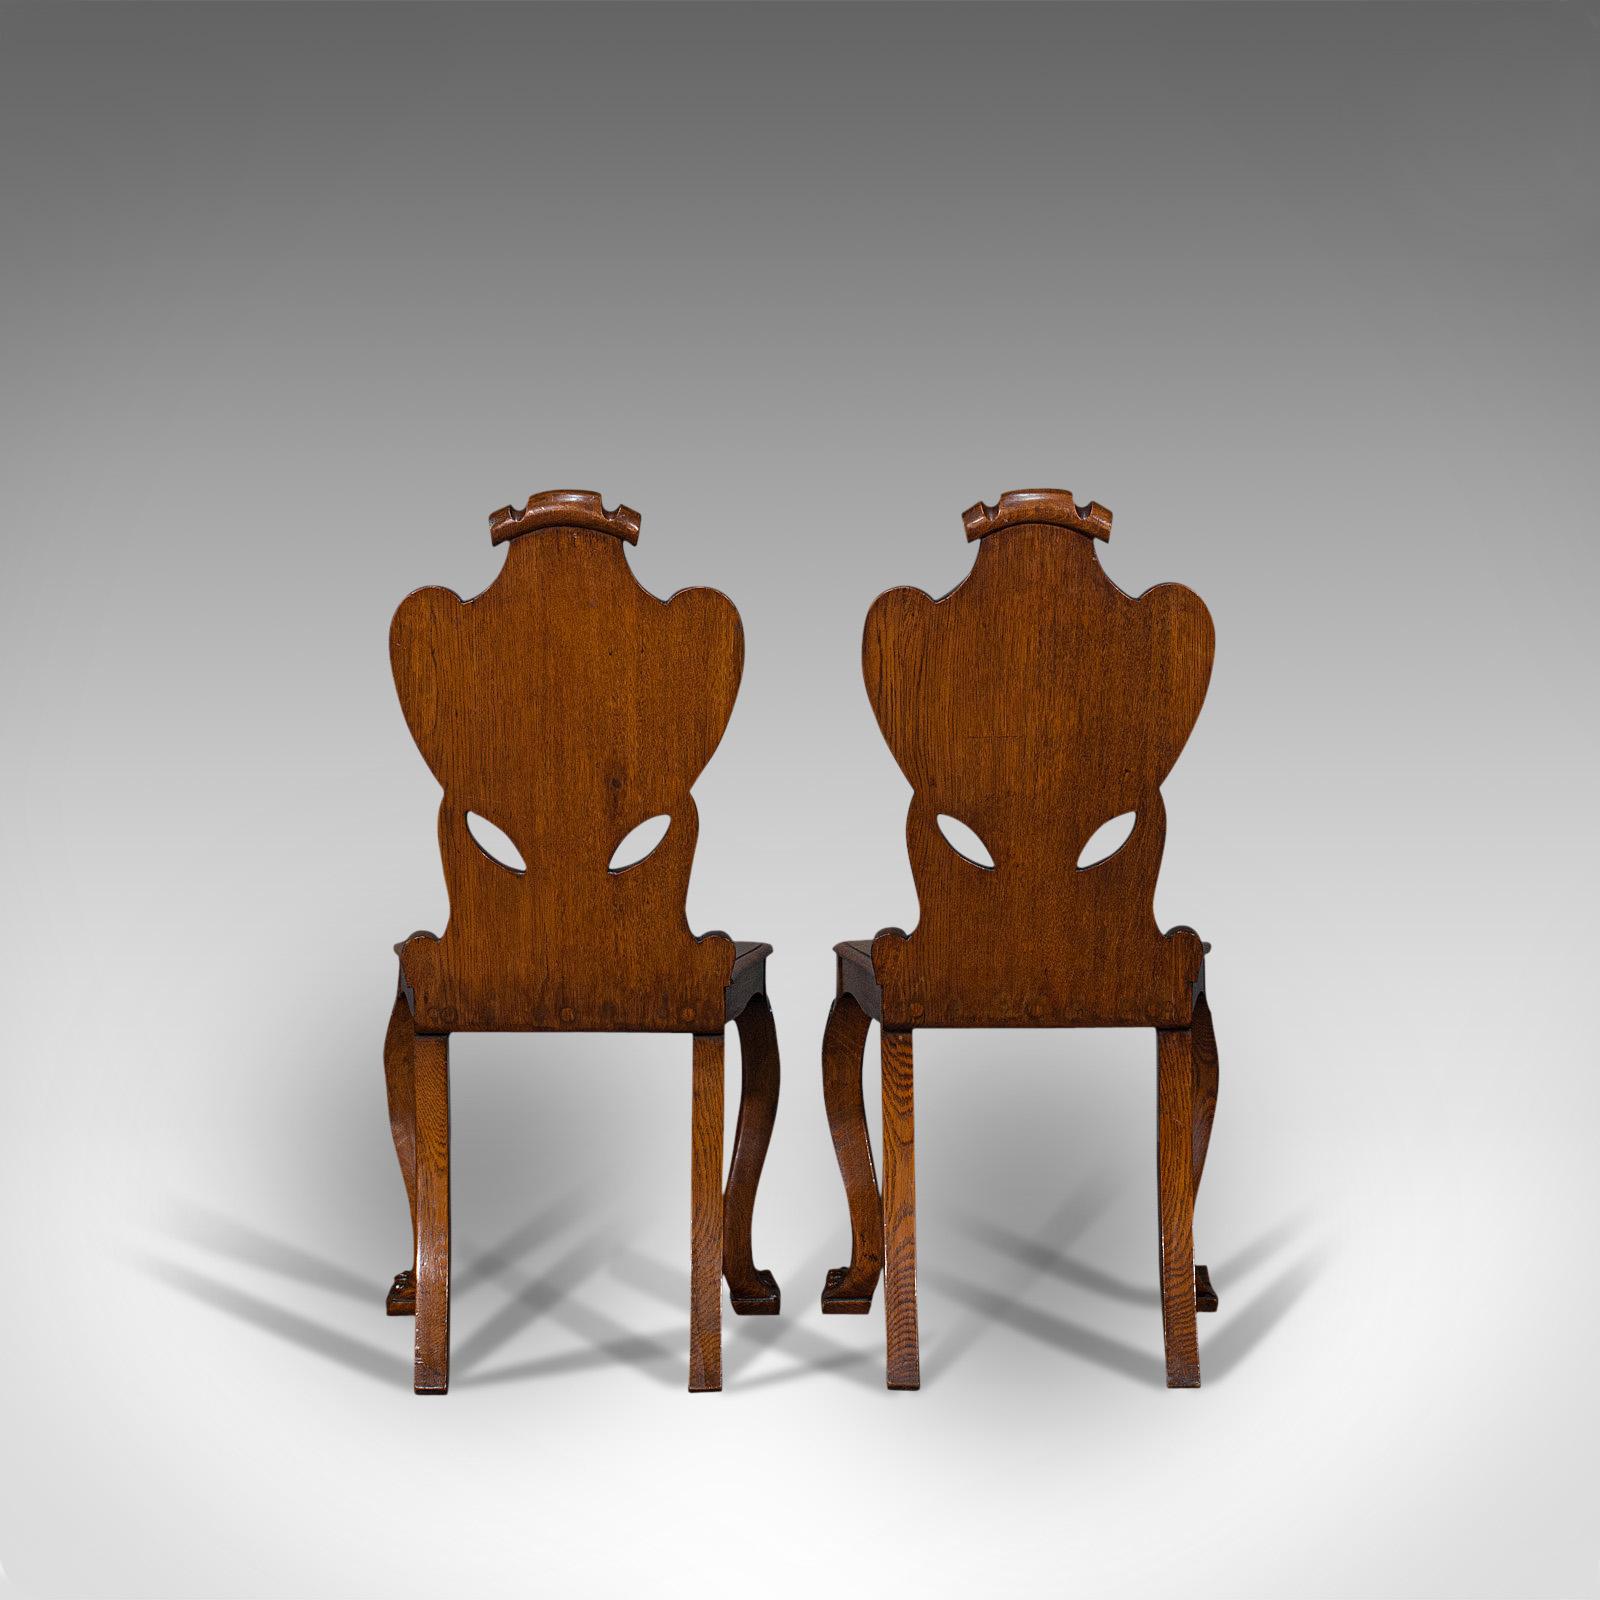 Pair of Antique Shield Back Chairs, Scottish, Oak Hall Seat Victorian circa 1880 For Sale 2